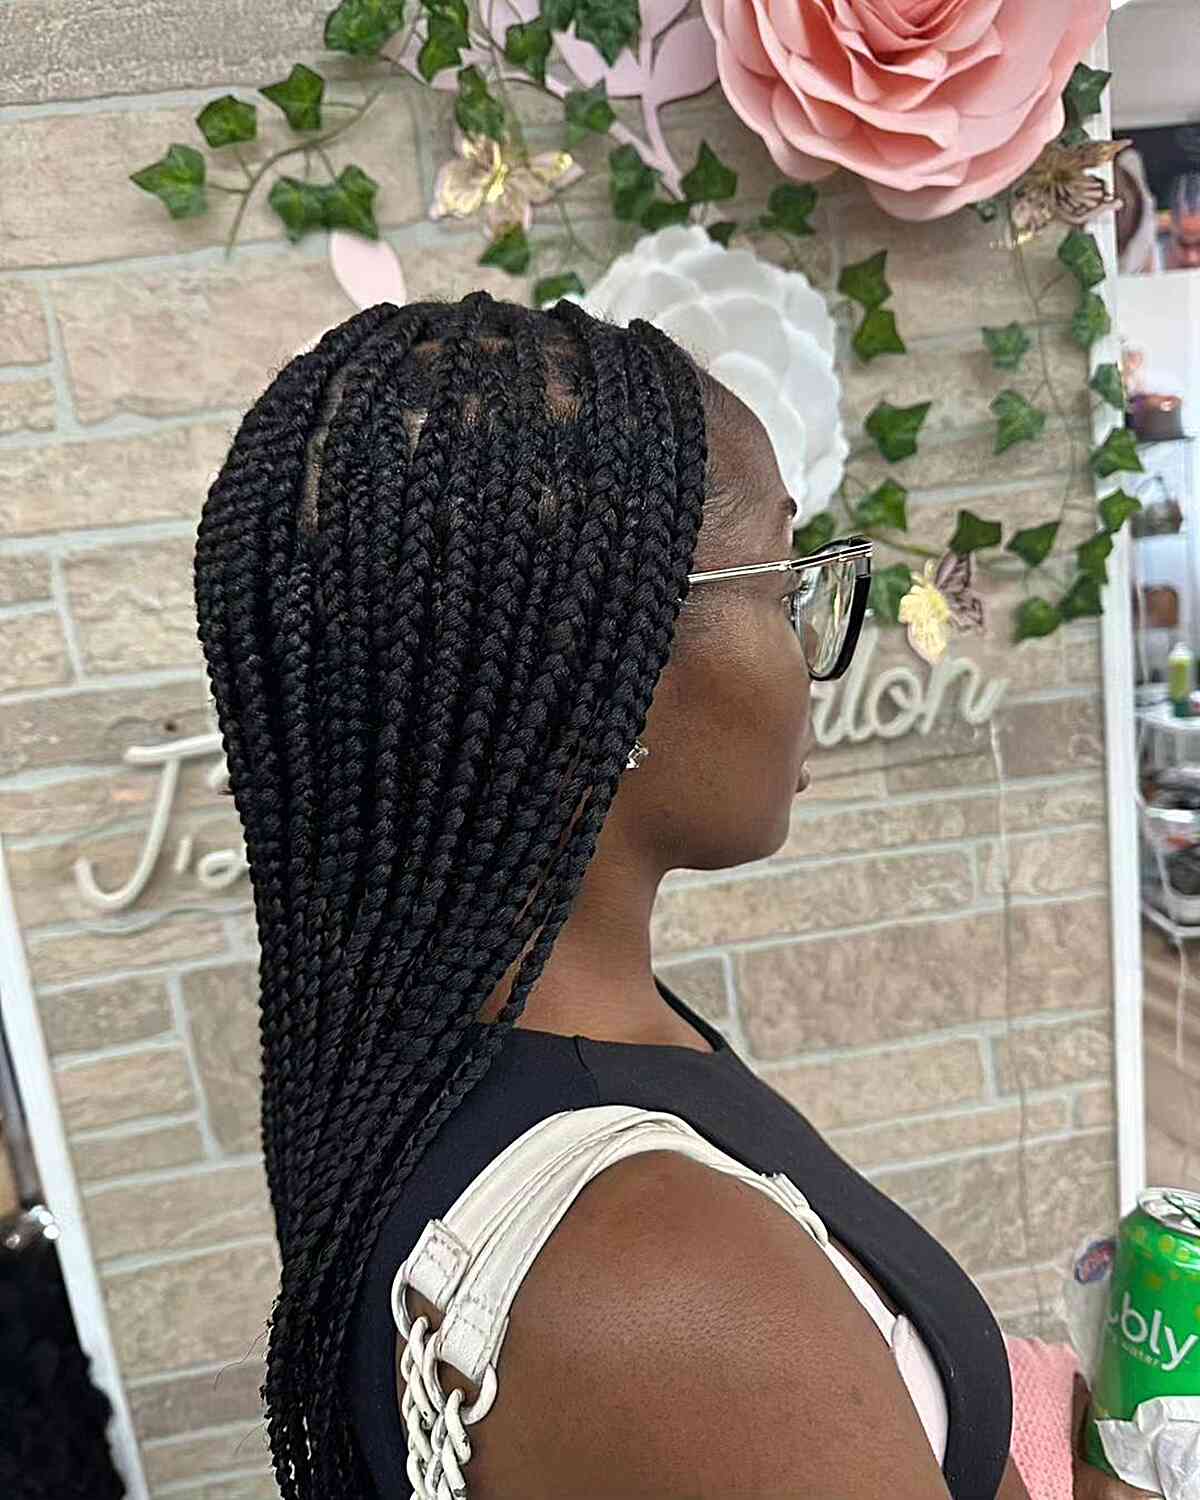 Mid-Sized Poetic Justice Braids